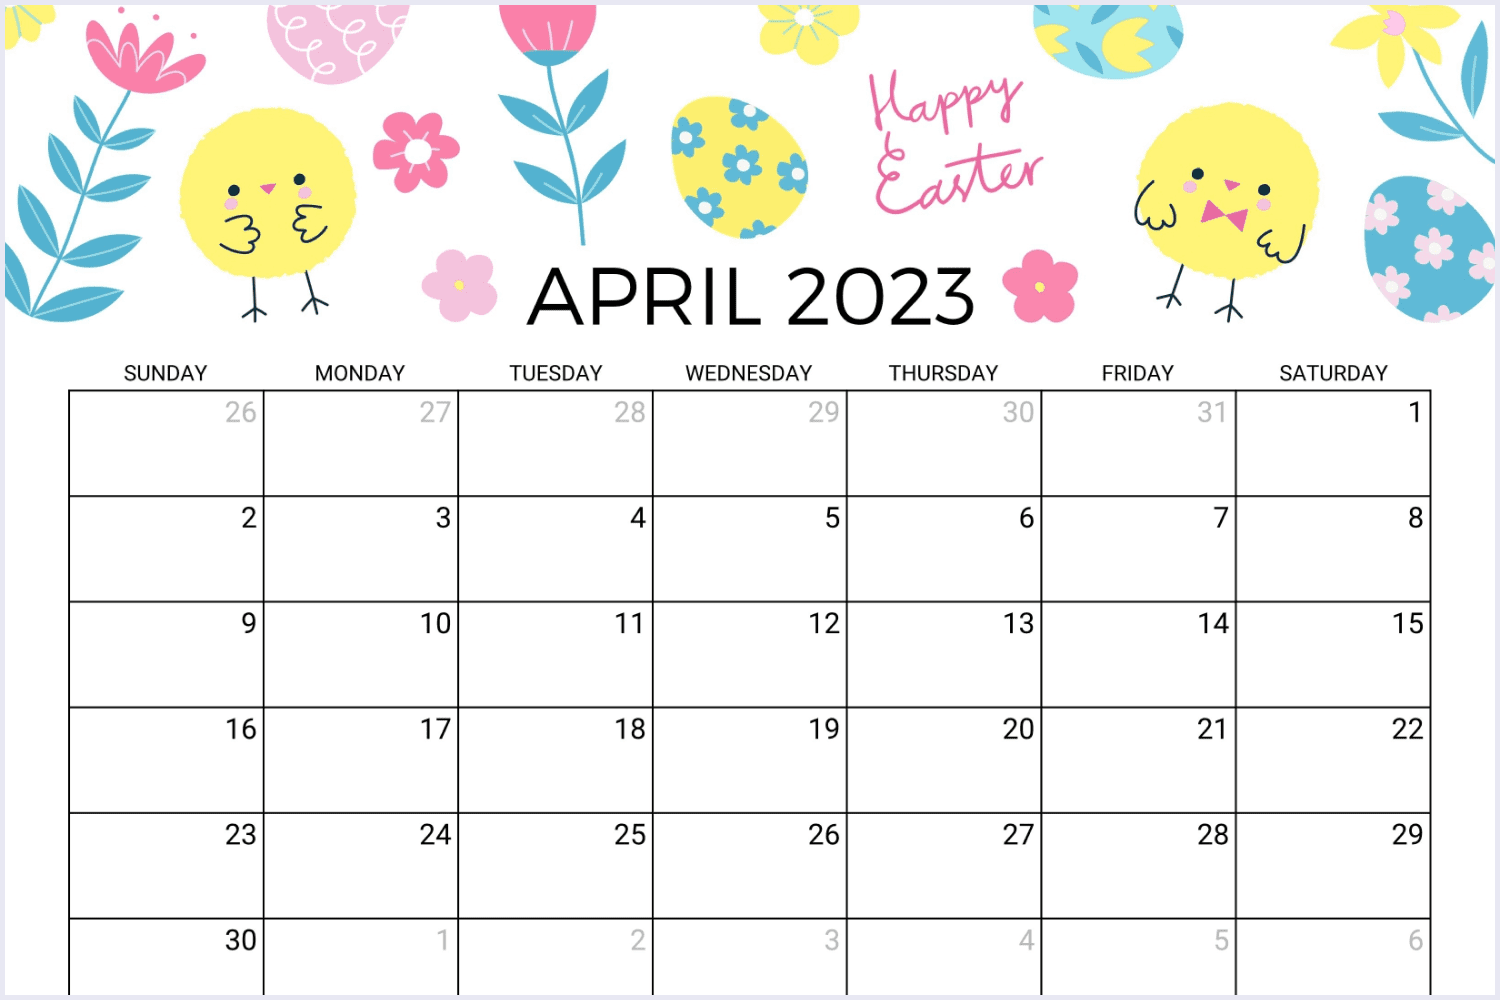 April calendar with delightful flowers, baby chicks, and Easter eggs.